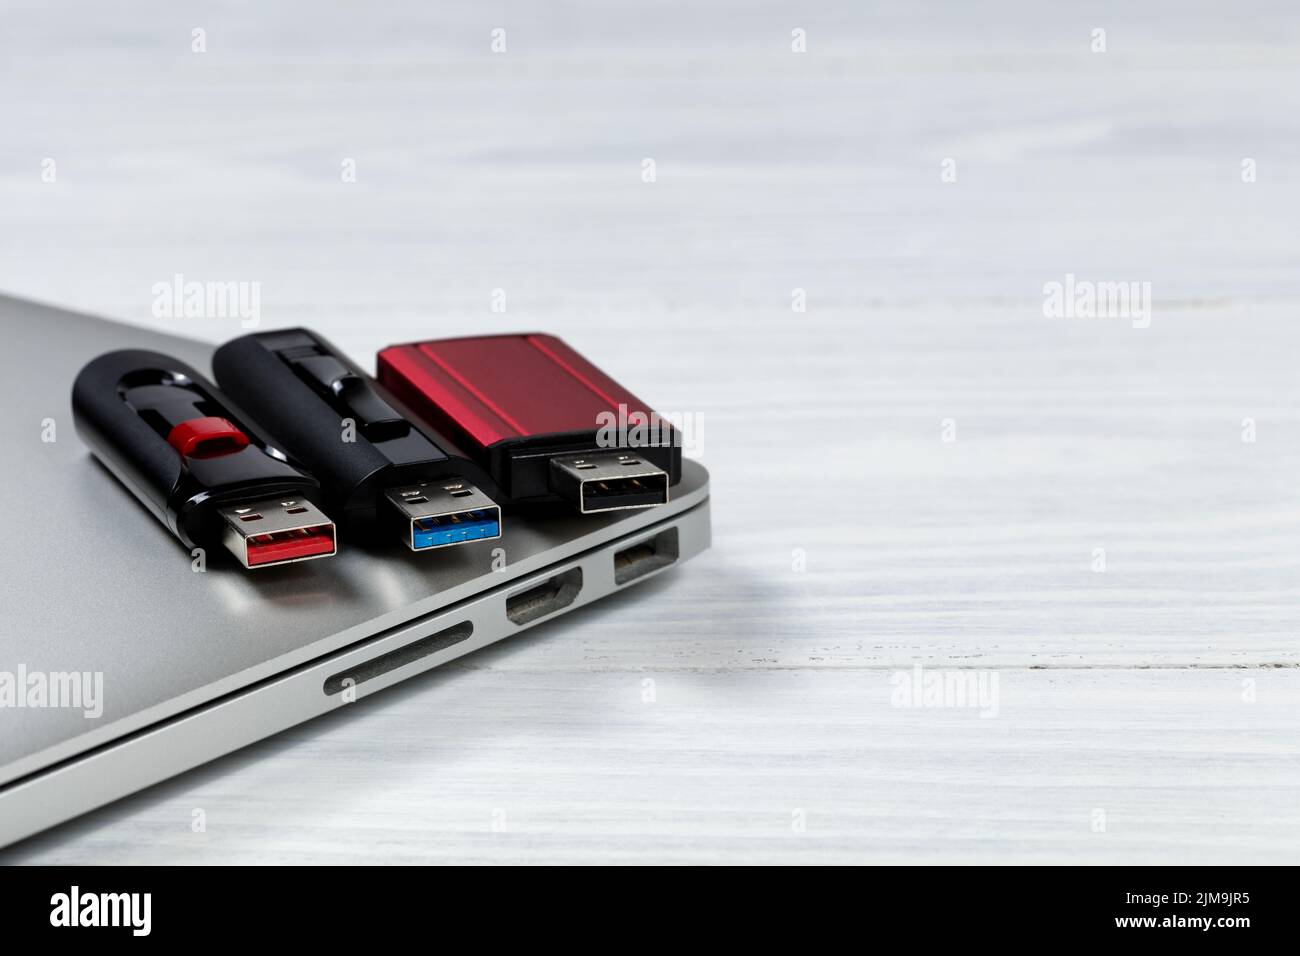 Thumb drives with different colors for USB speed technologies on top of computer Stock Photo